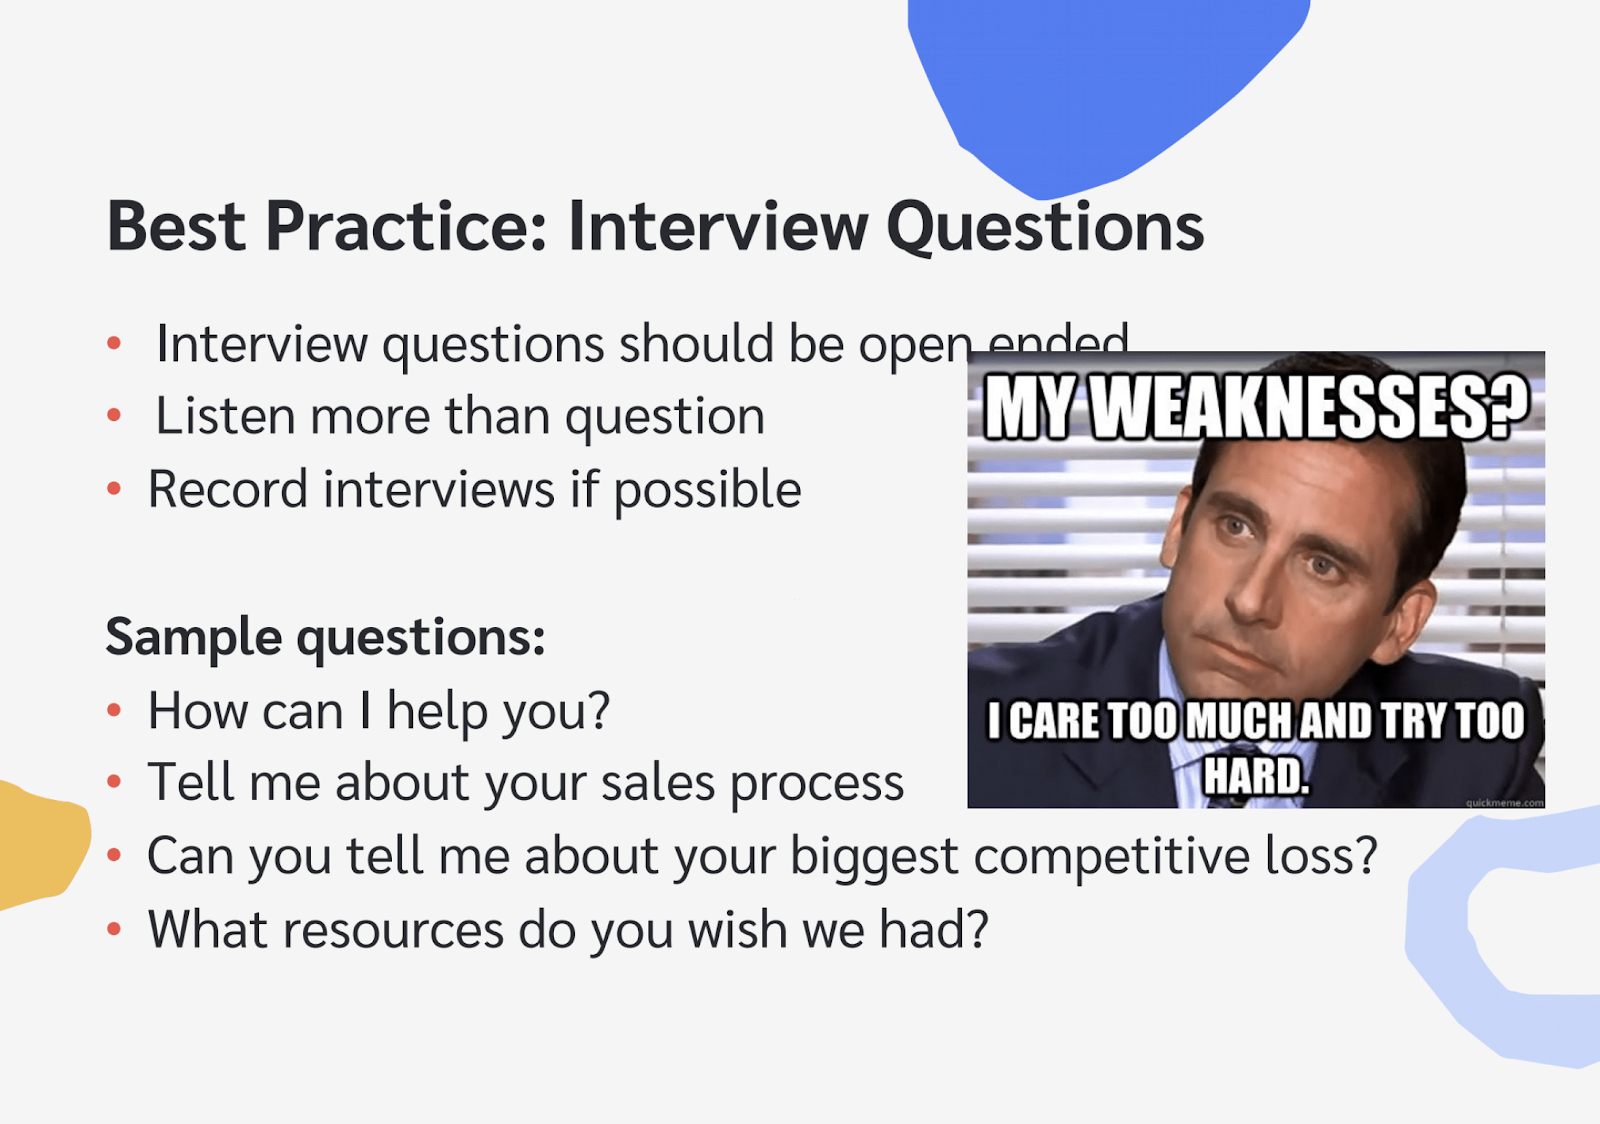 Examples of best practice interview questions.